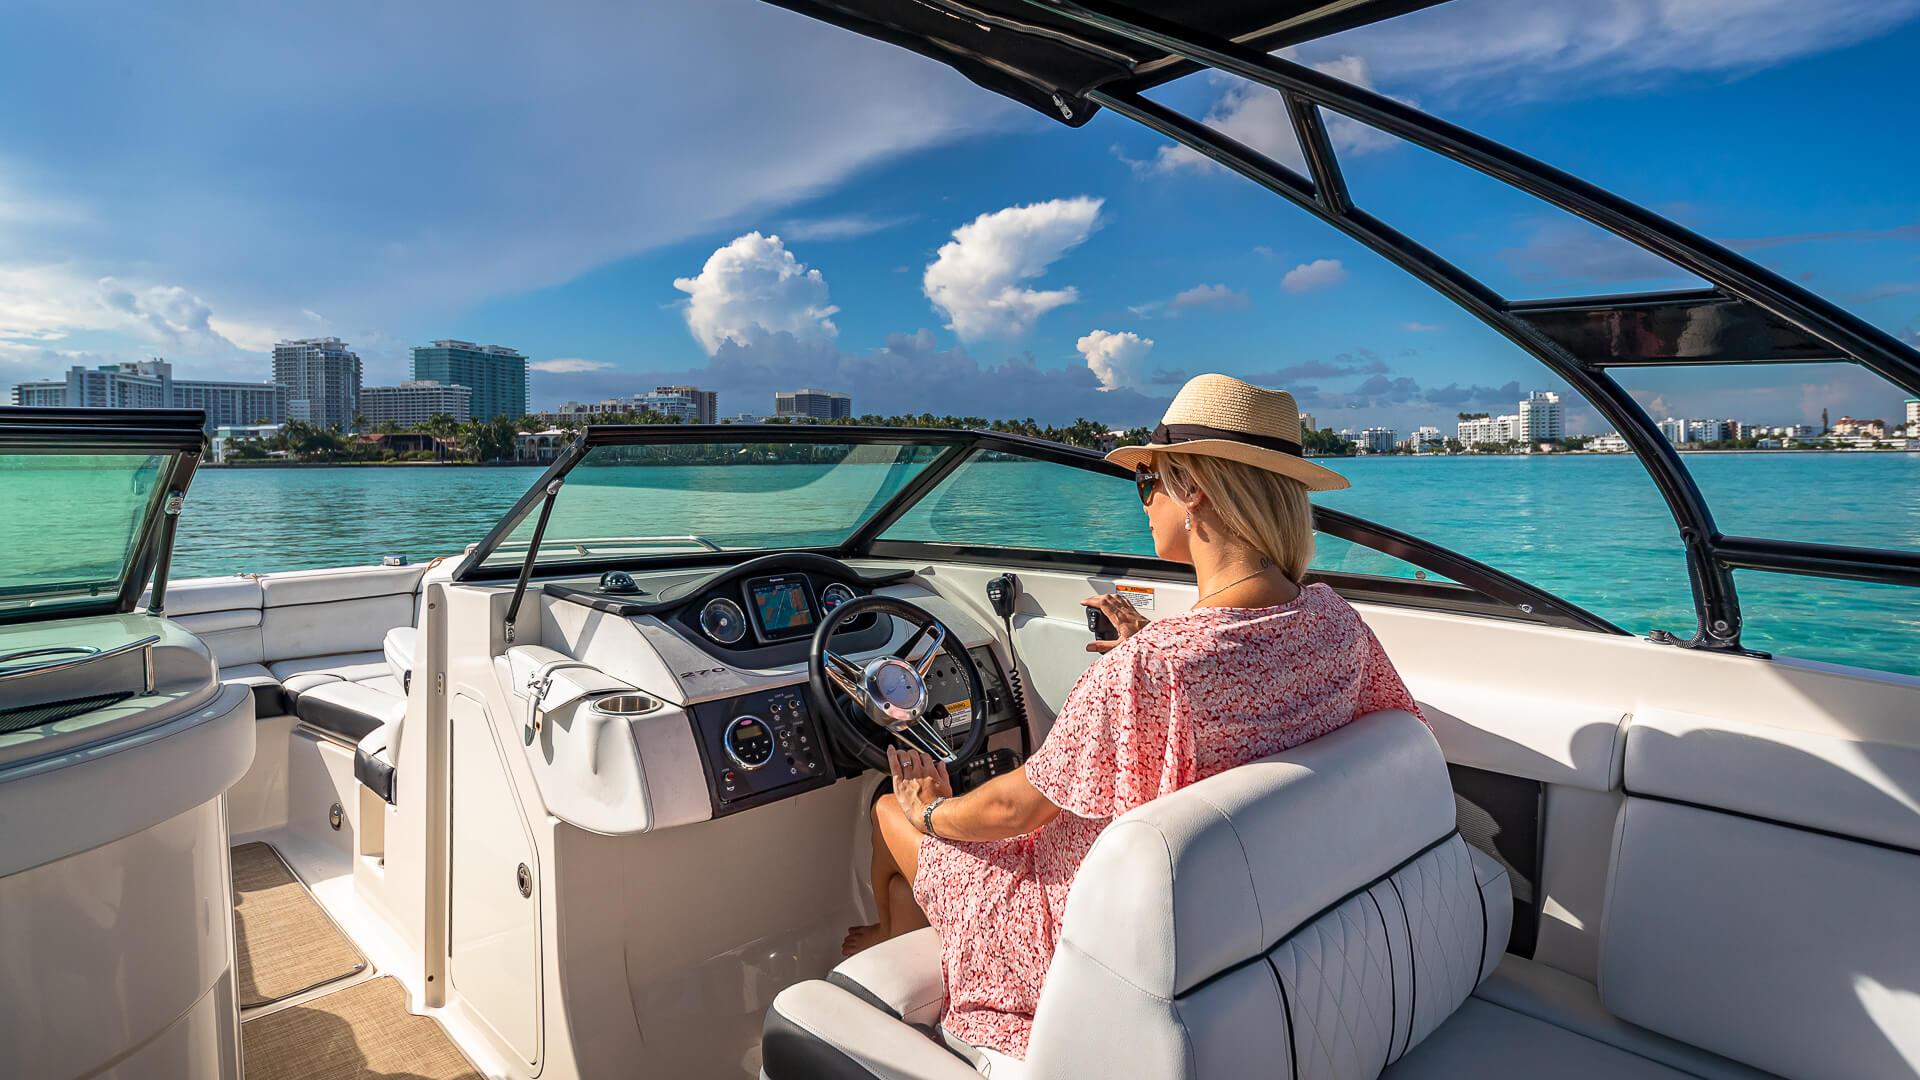 Best Miami Beach Boat rentals to Learn Boating